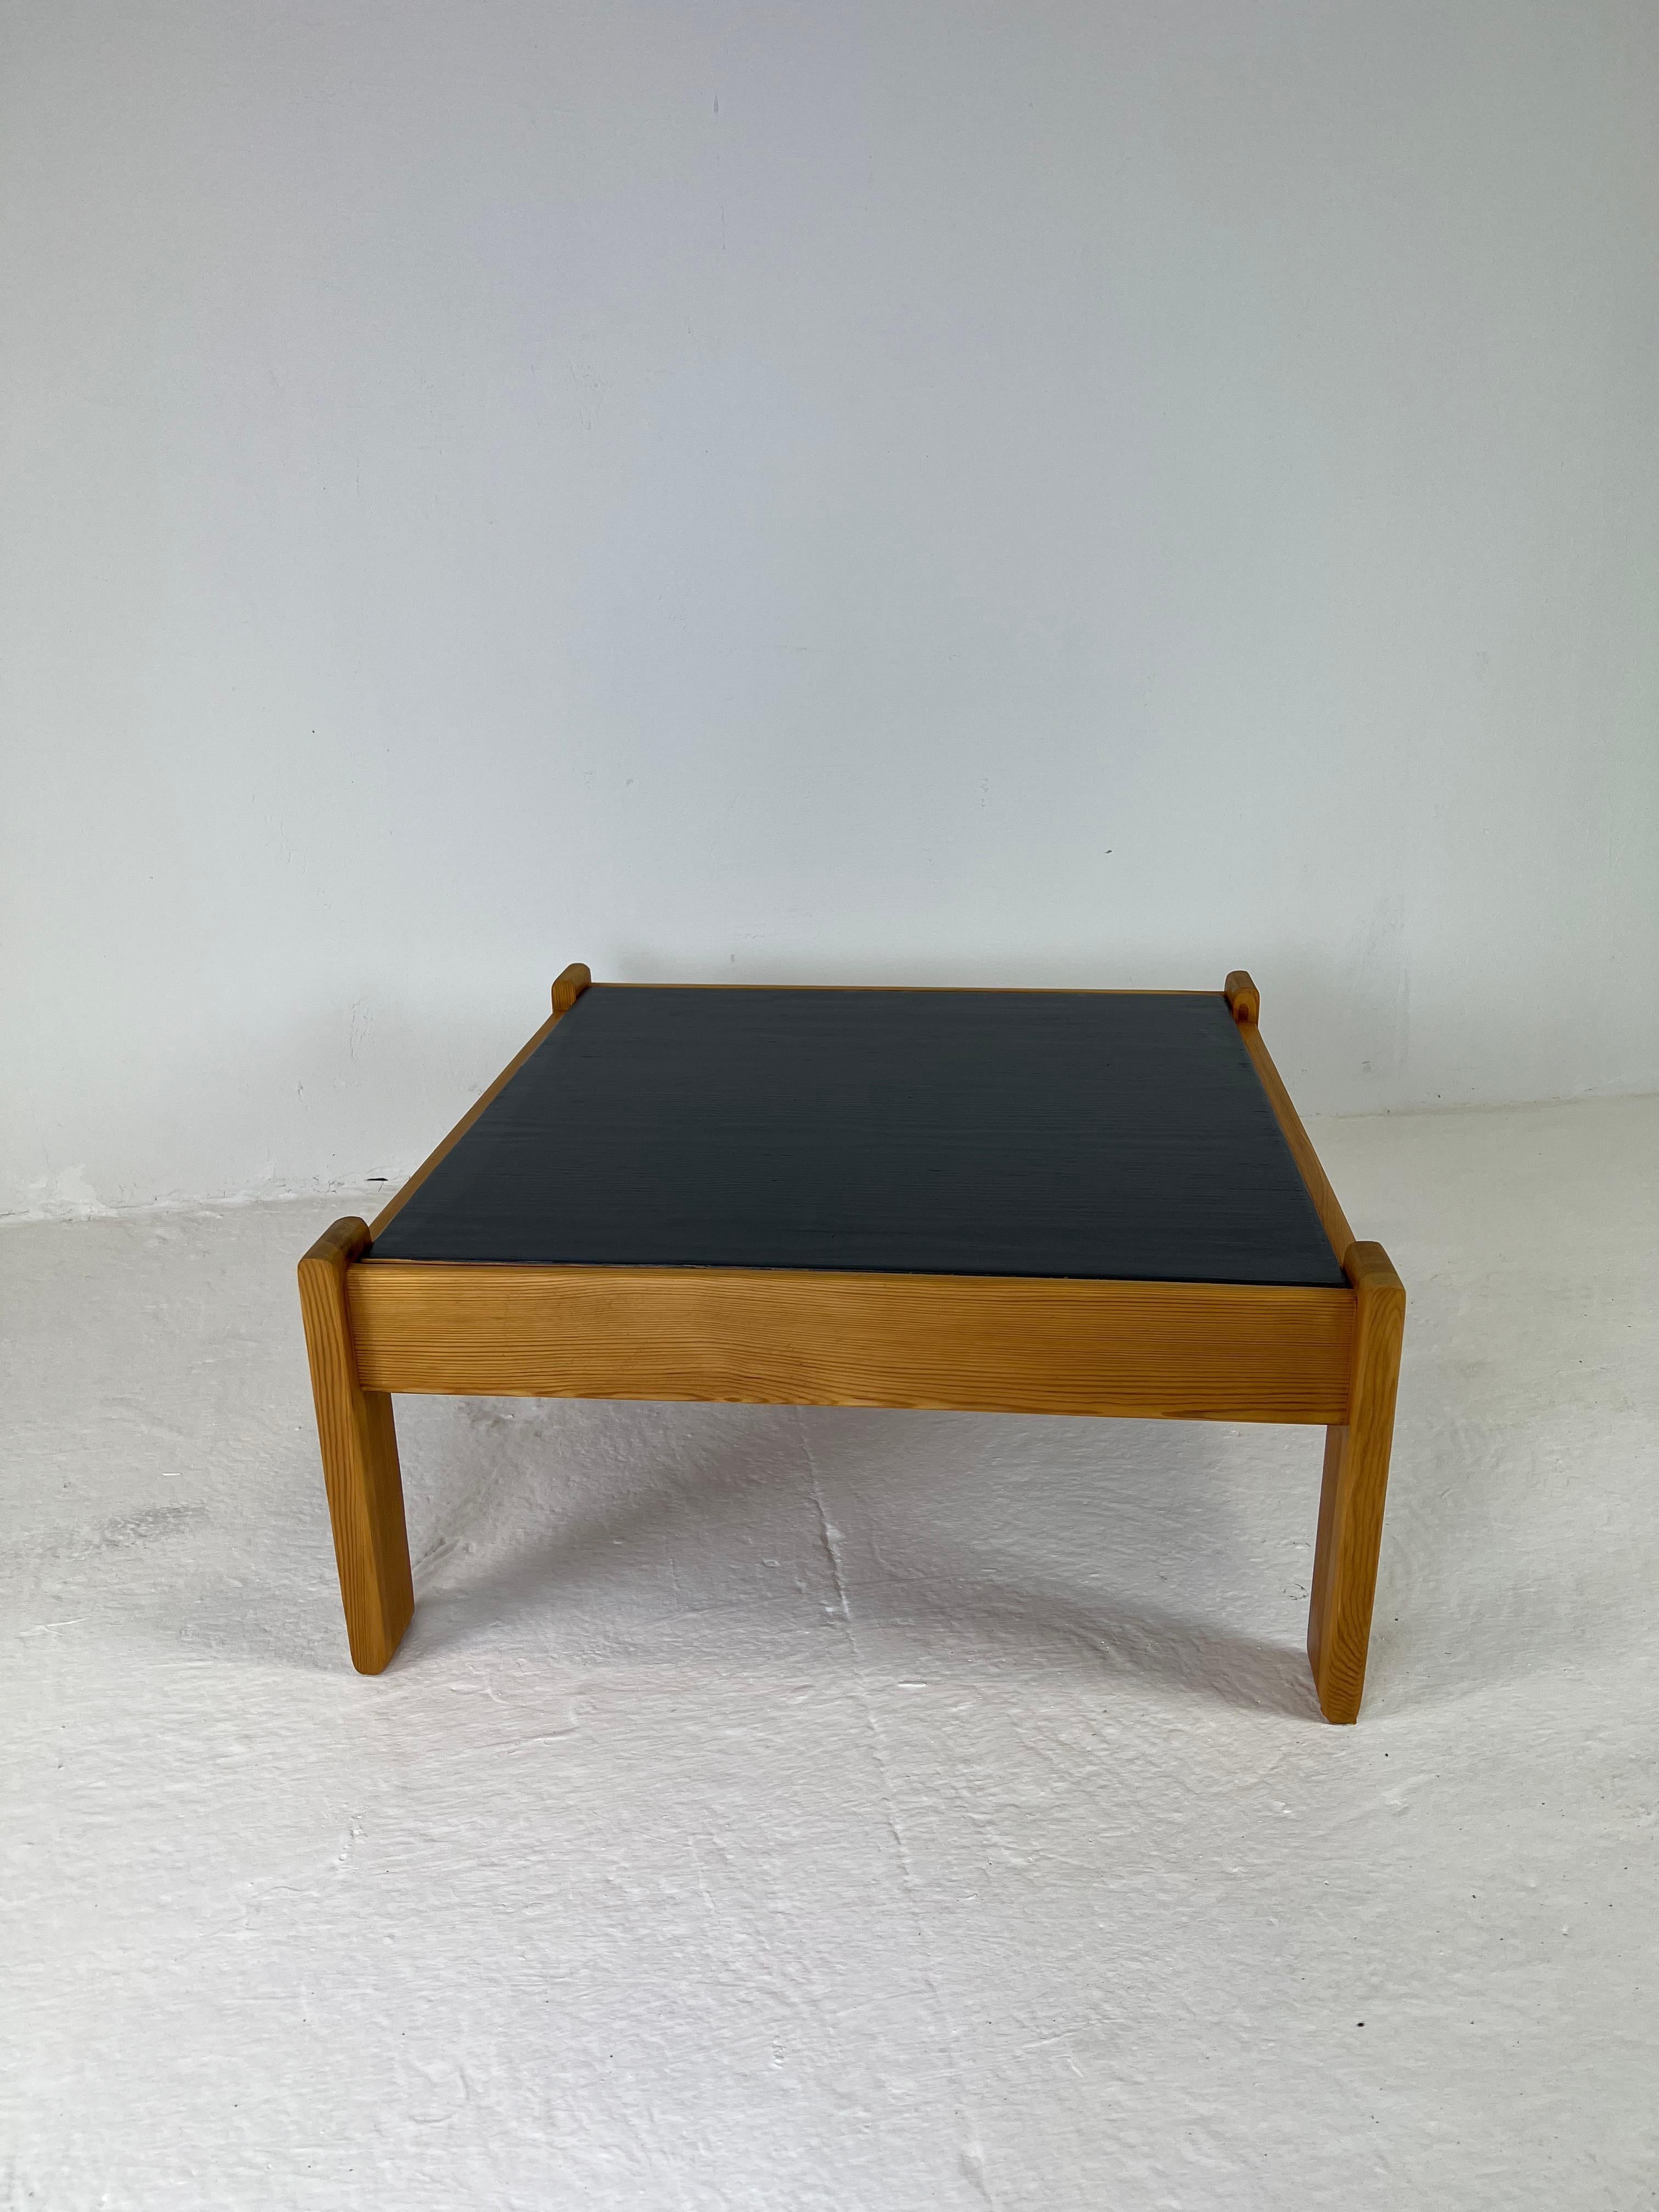 Two-Sided Modernist Coffee Table in Pine Wood, 1970s For Sale 5